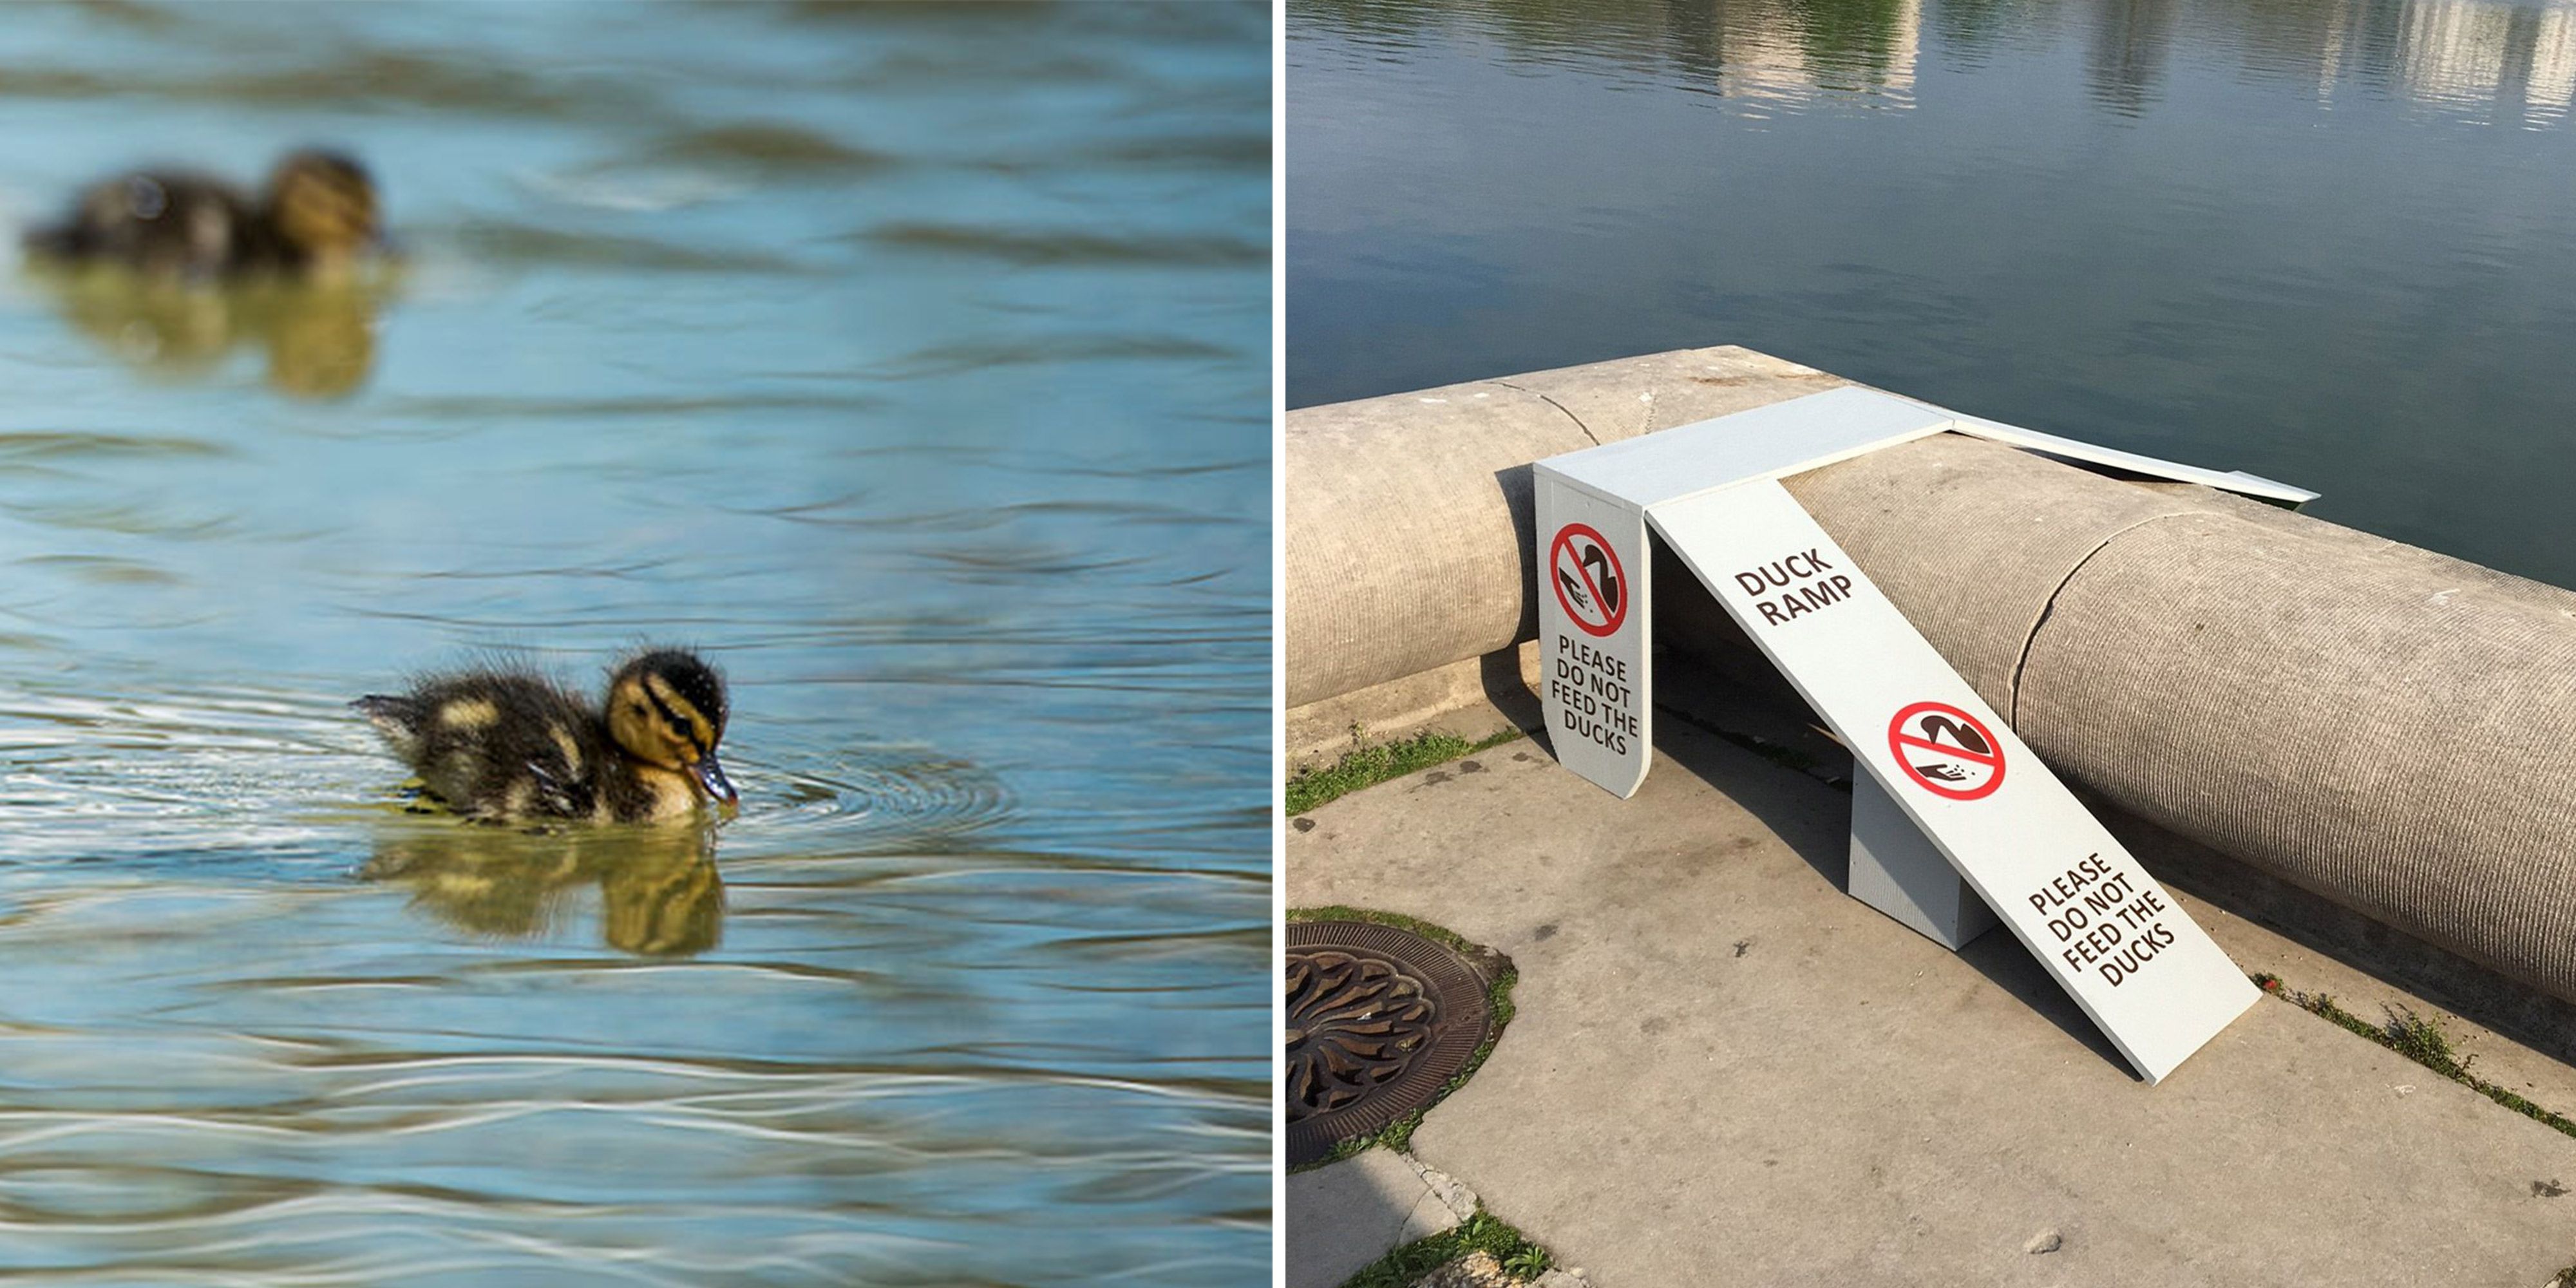 Duck Ramp in DC Sparks Drama